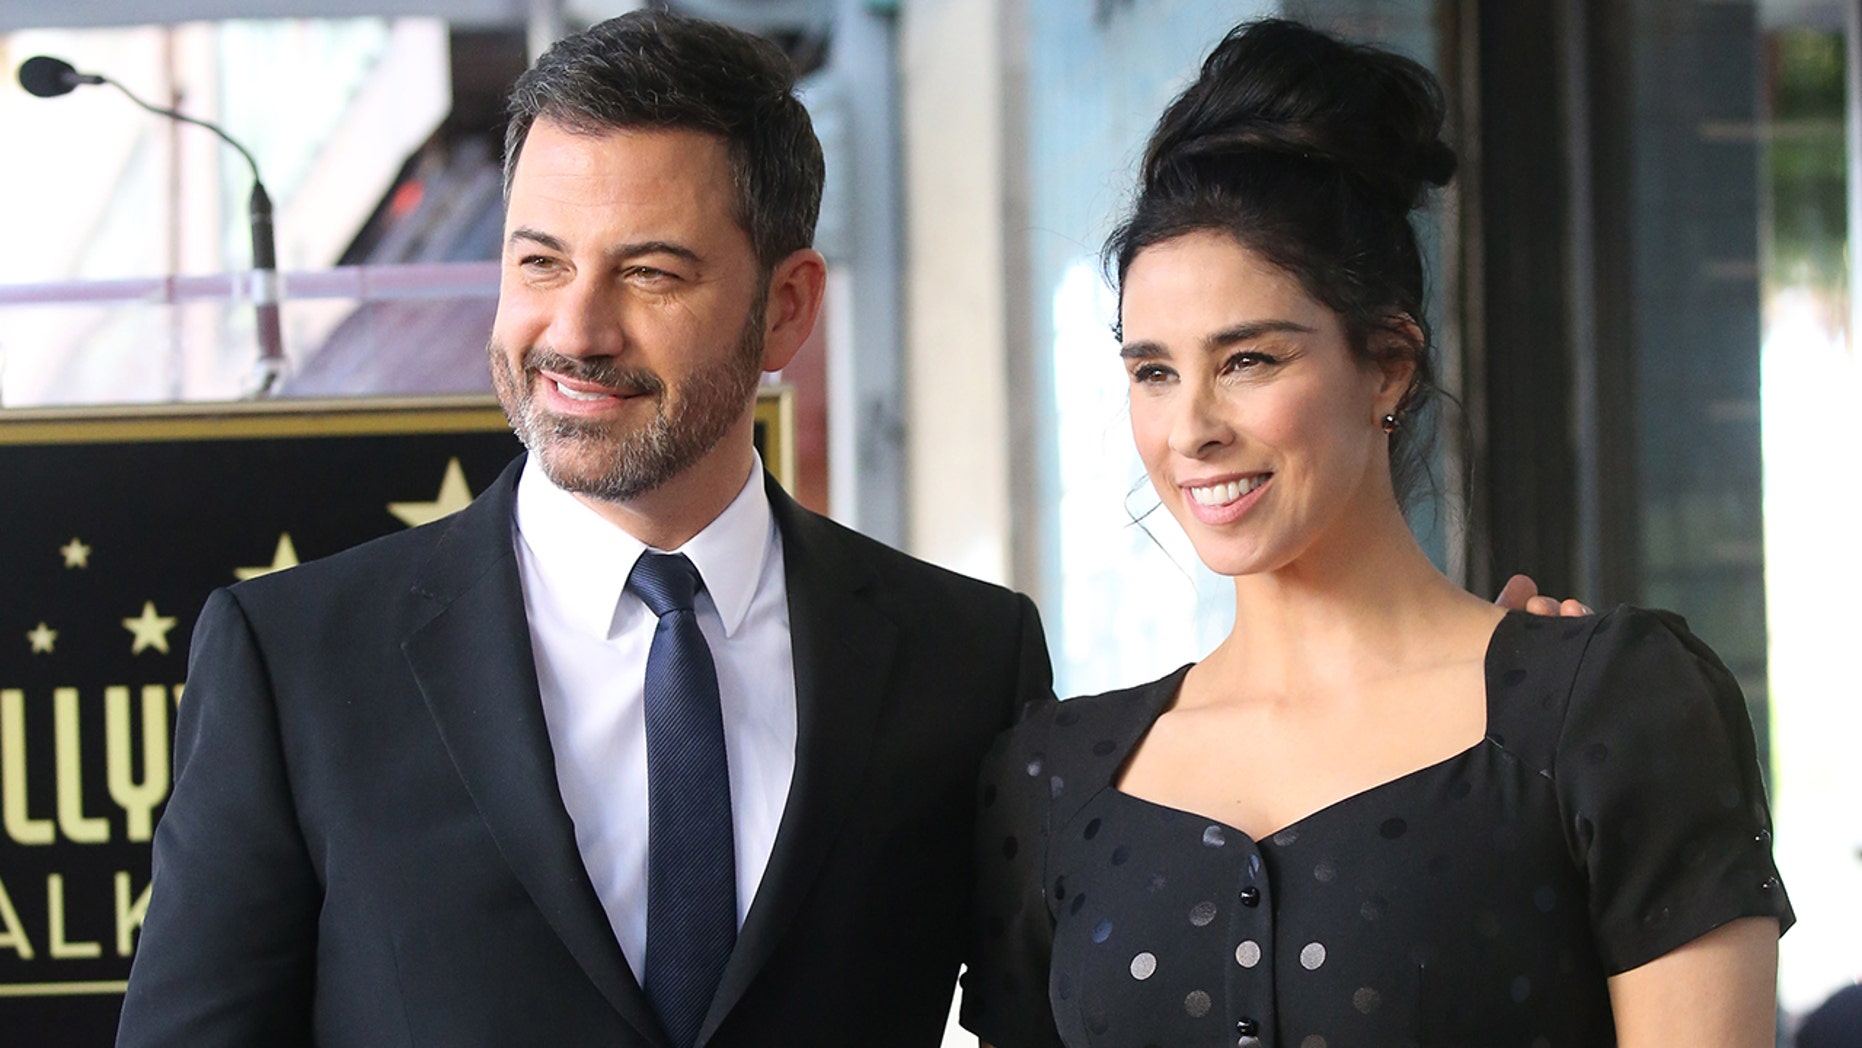 Jimmy Kimmel opens up about being friends with ex-girlfriend Sarah Silverman: 